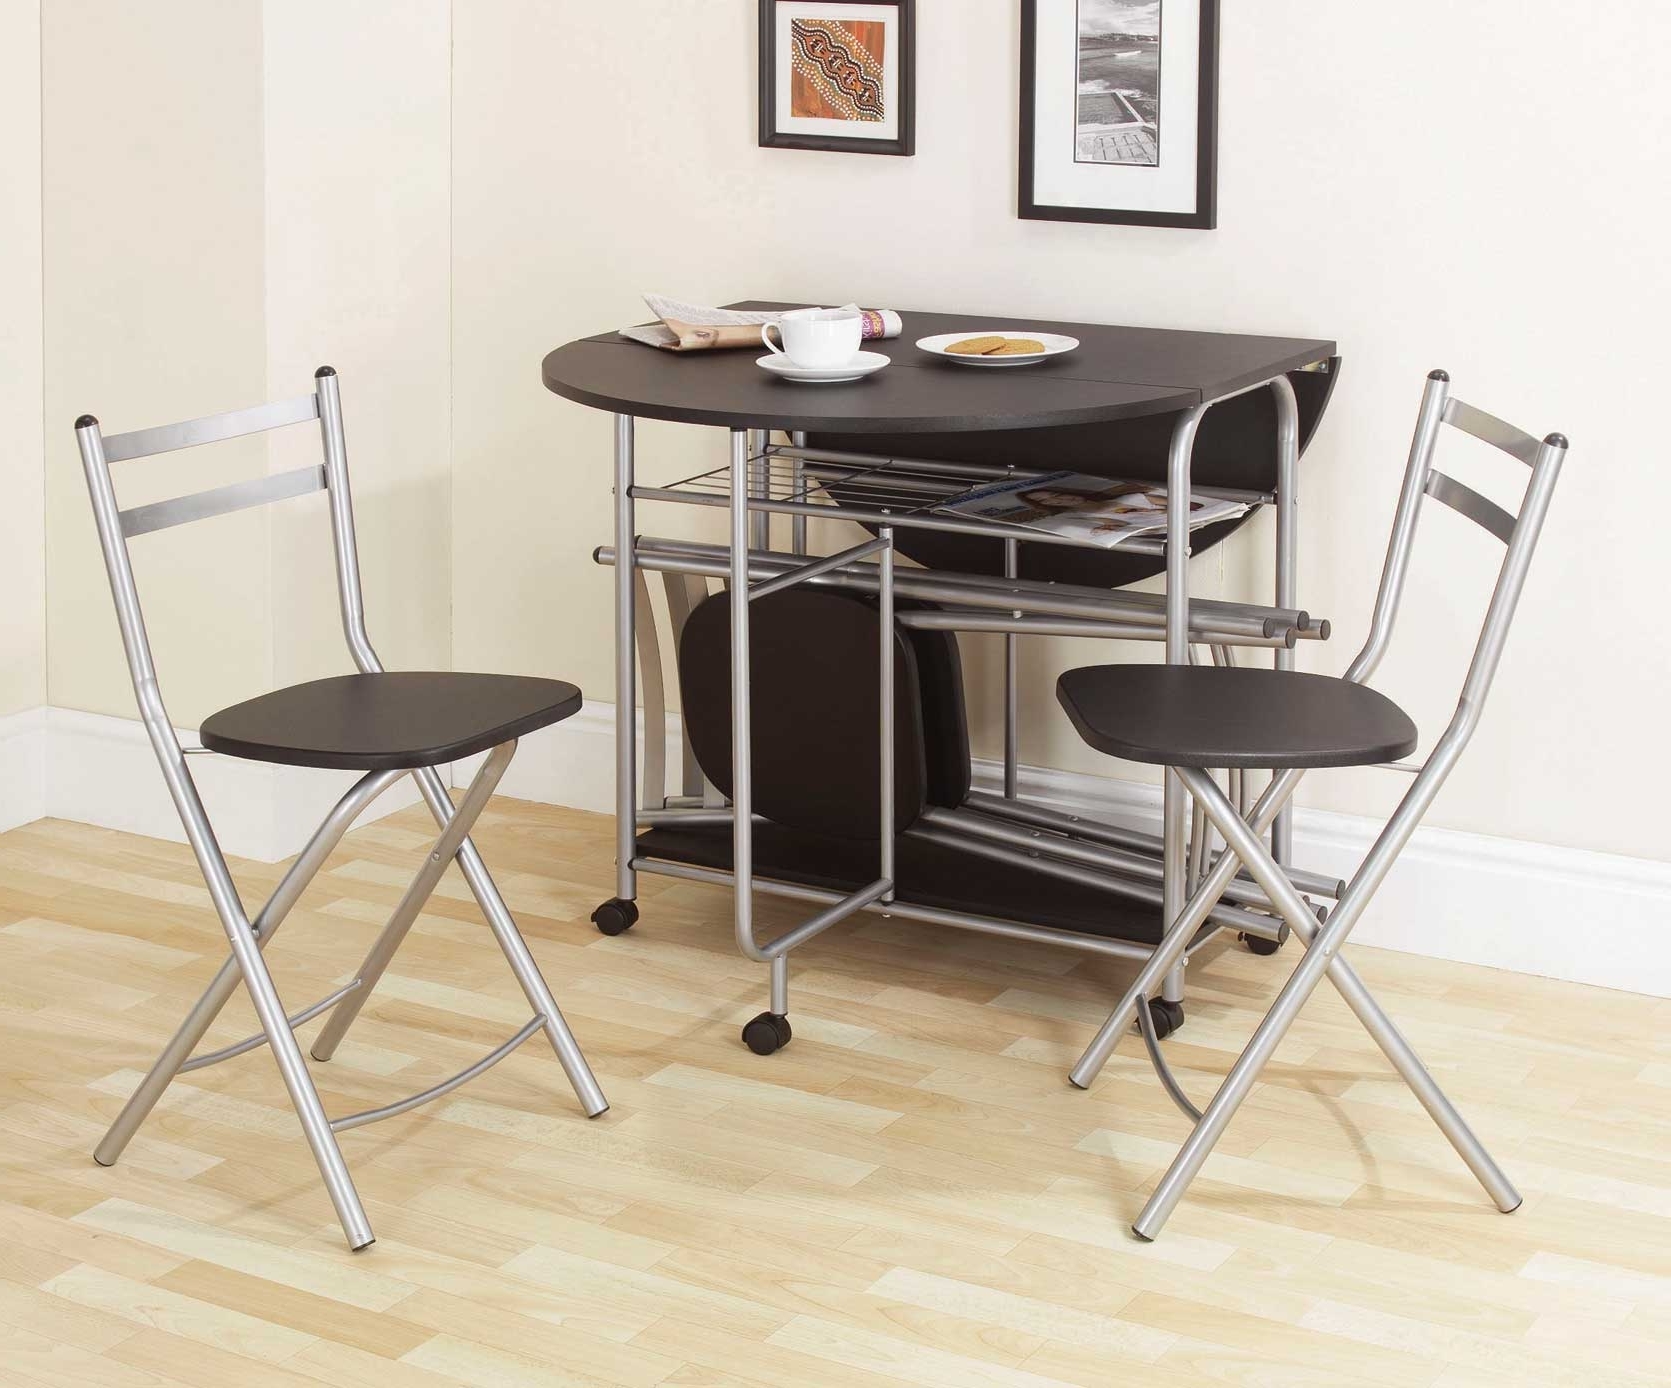  fold away table and chairs 4